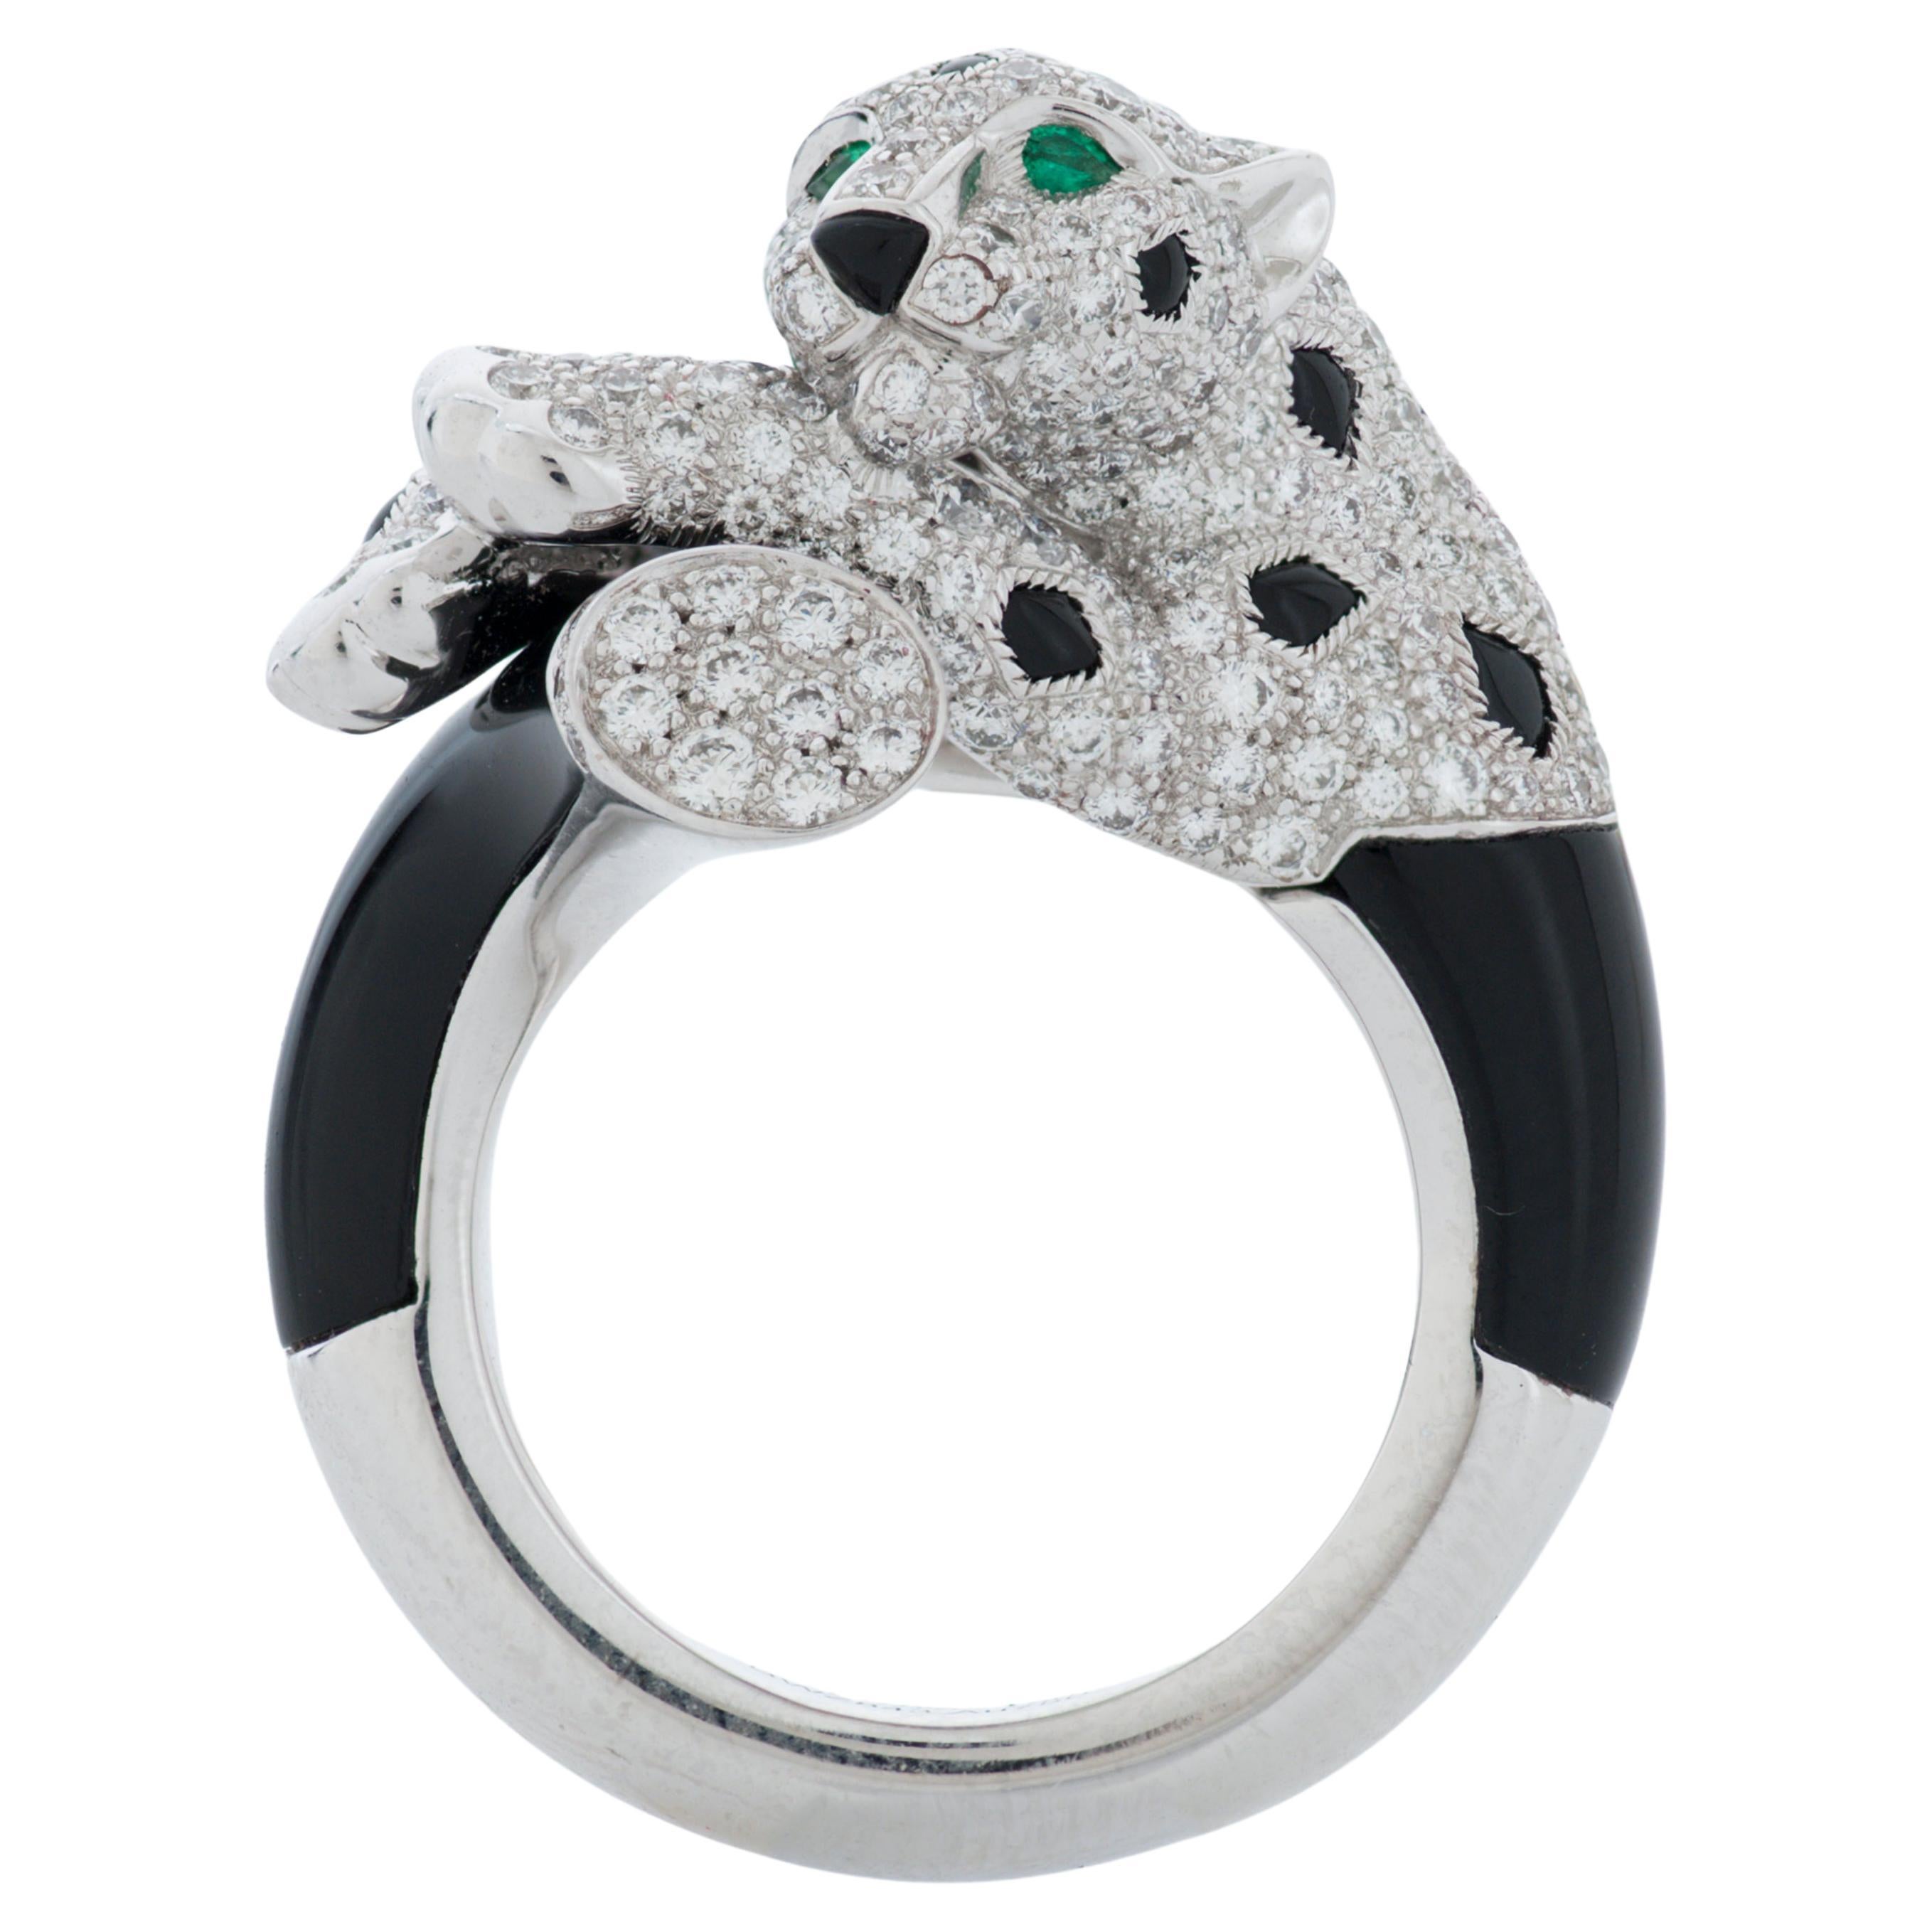 Panthere De Cartier Diamond, Onyx and Emerald Ring in 18kwg with Cartier Box For Sale